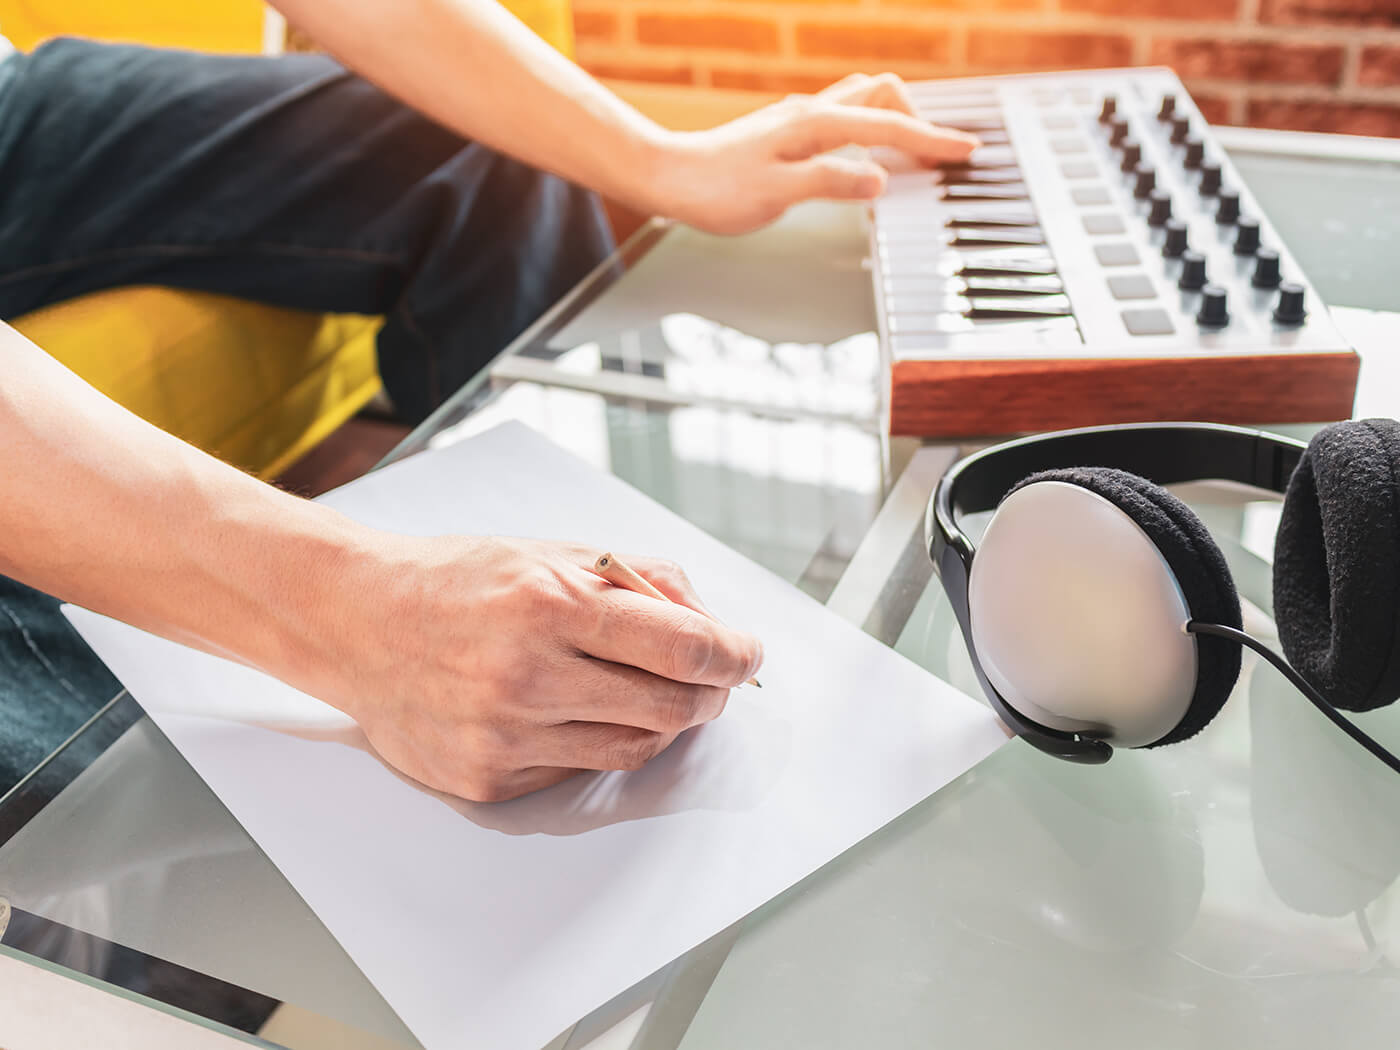 SONGWRITING CLASSES ONLINE